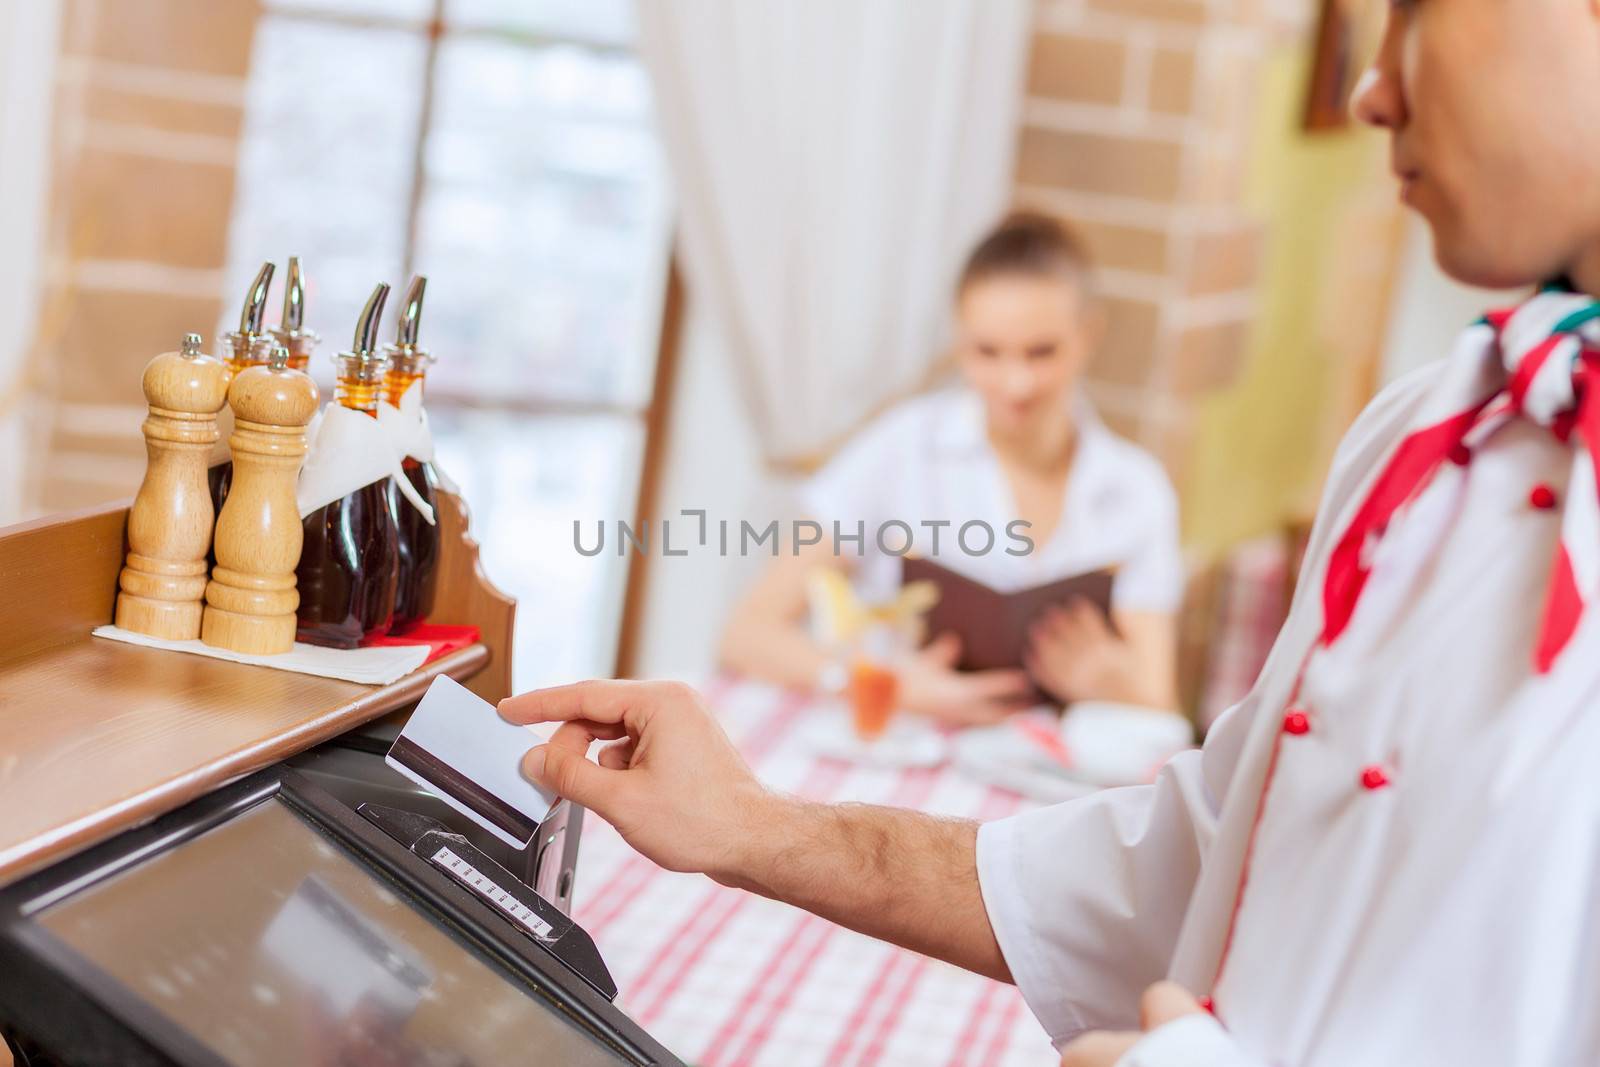 Image of handsome chef inserting card in terminal